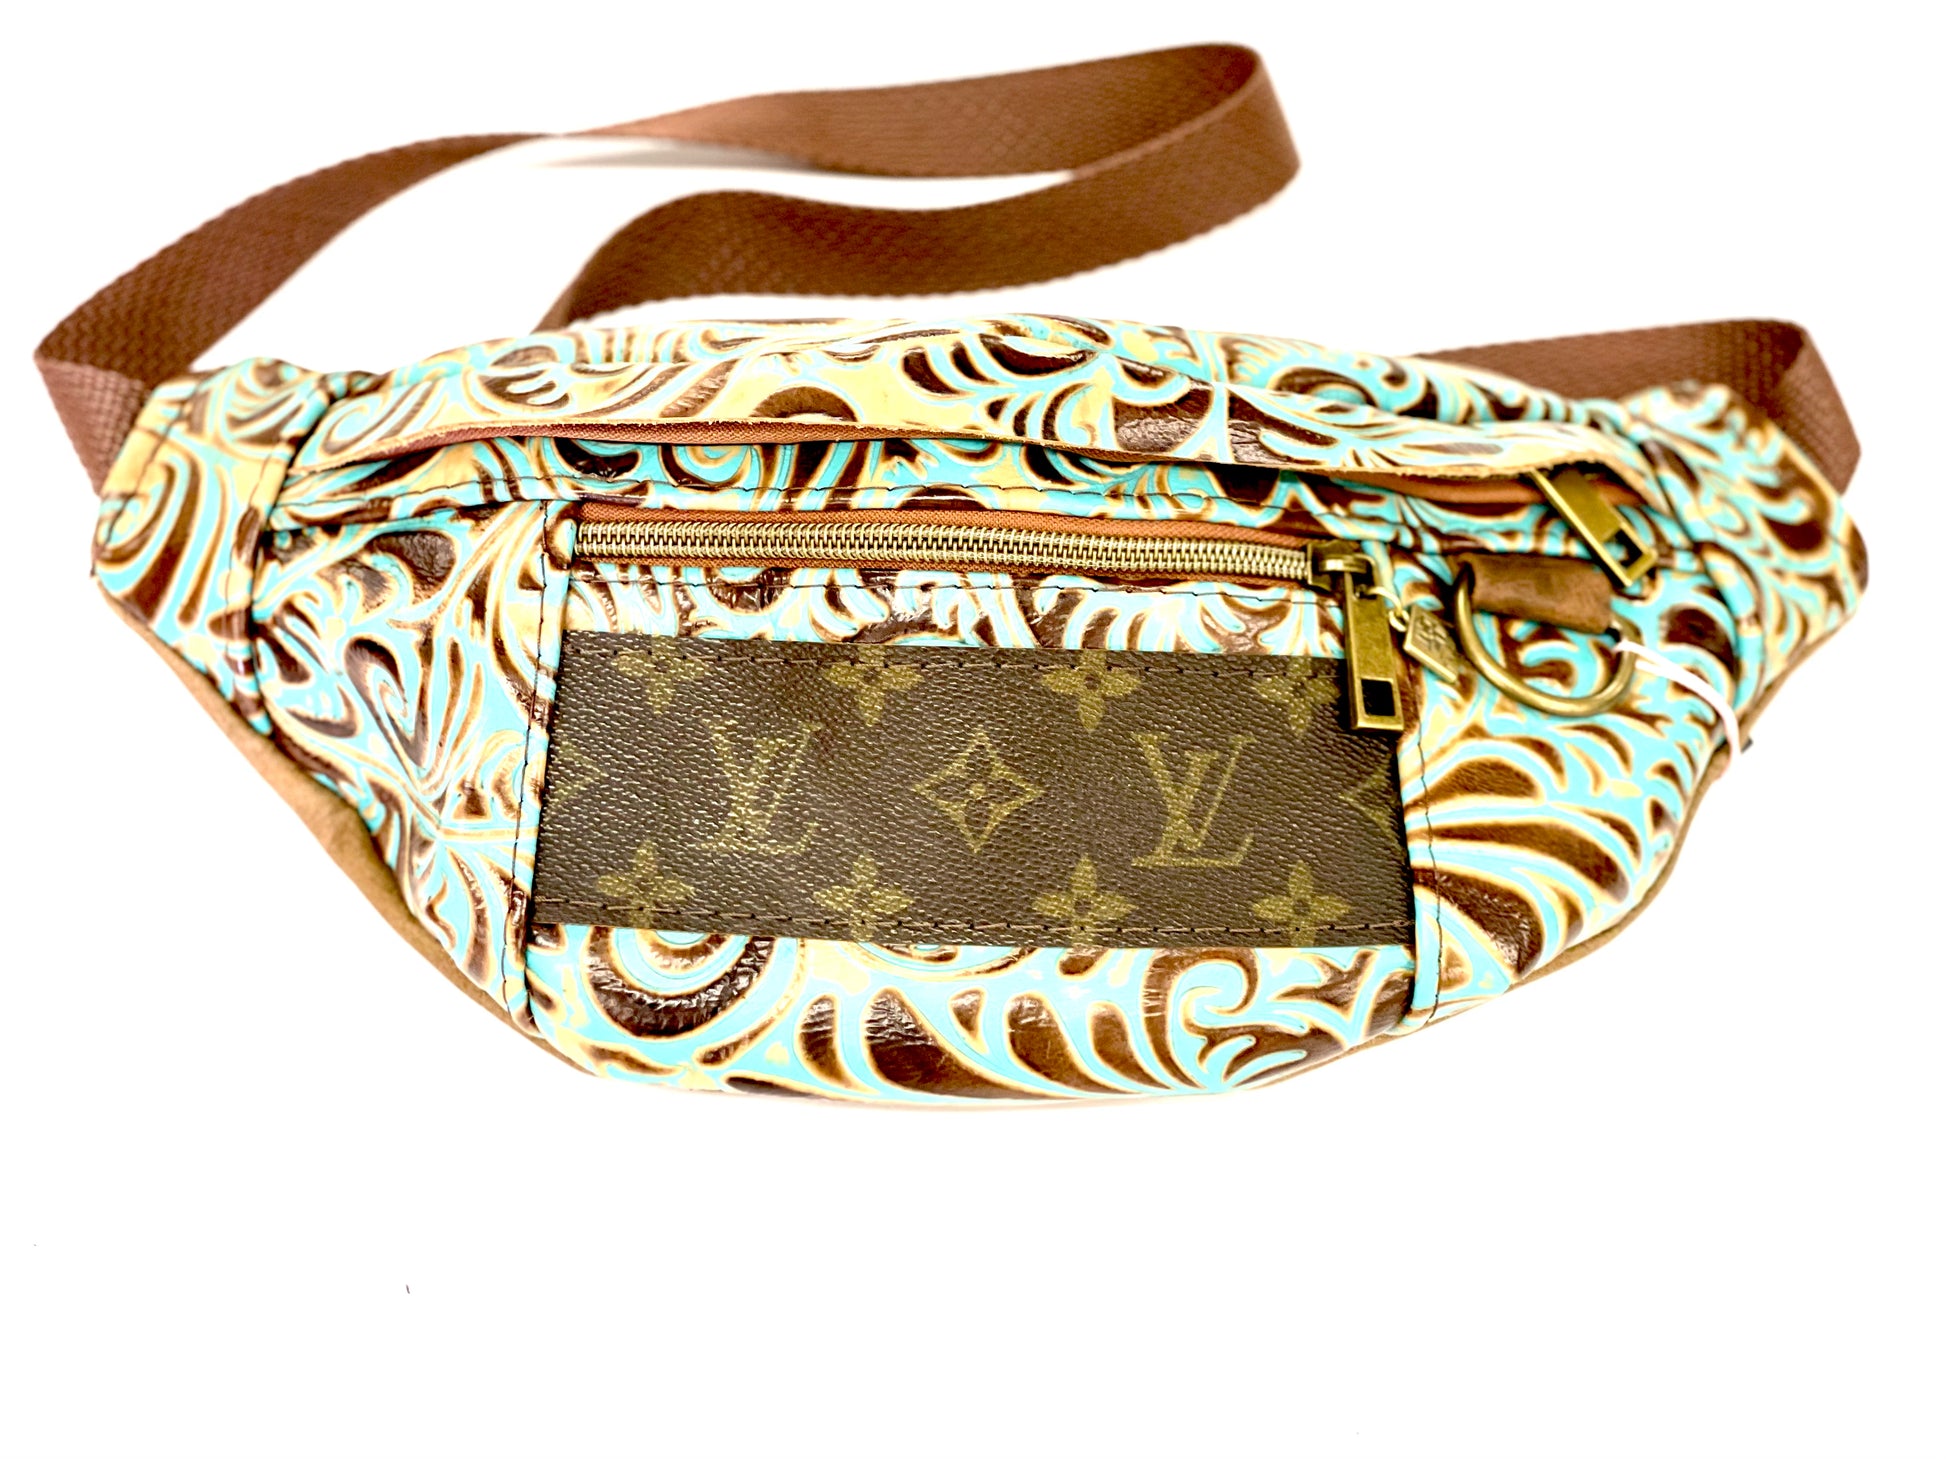 Adjustable Bum Bag STRIP LV - Patches Of Upcycling Embossed Turquoise Swirls Patches Of Upcycling